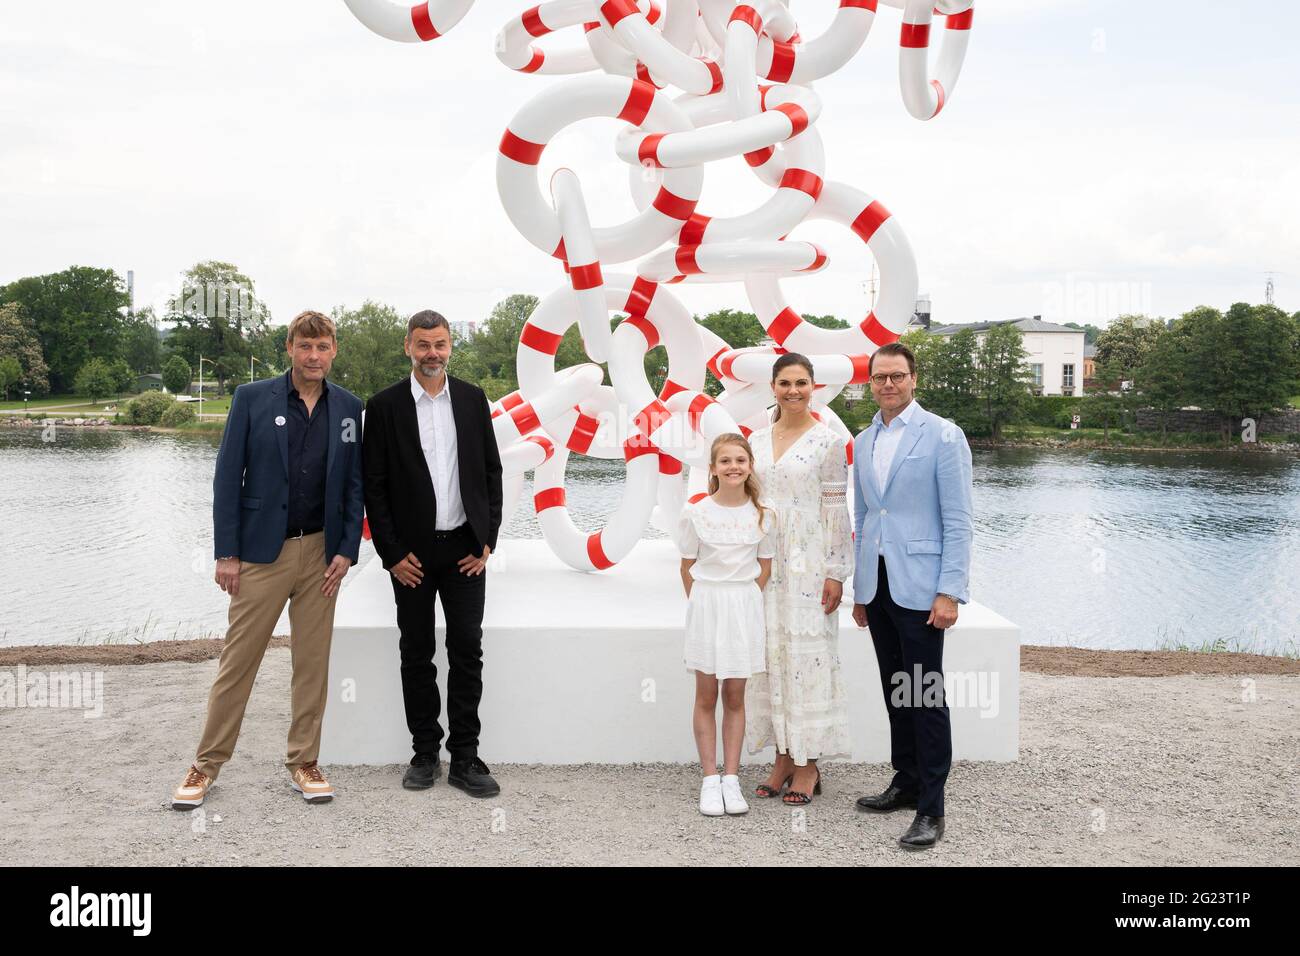 The Crown Princess family meets the Danish-Norwegian artist duo Michael Elmgreen and Ingar Dragset on 7 June 2021 before the inauguration of the artwork Life Rings at Djurgarden in Stockholm. The Princess Estelle Cultural Foundation, established by the Crown Princess and Prince Daniel, arranges annual sculpture exhibitions at Djurgården. This year's artwork is the second permanent work that will be part of a future sculpture park in the area. Stock Photo